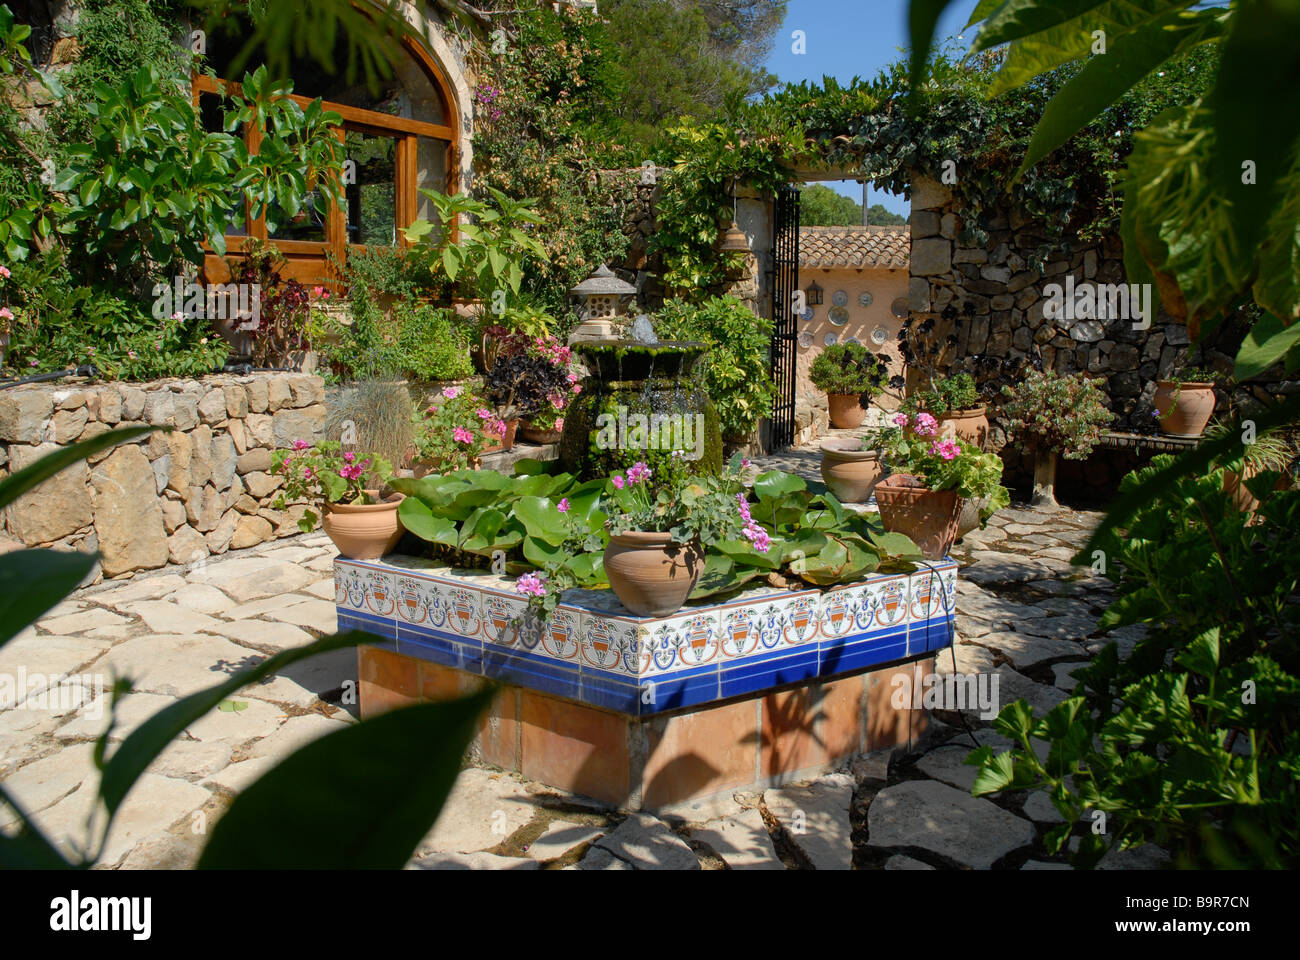 Spanish Courtyard Garden With Formal Pond And Water Feature Jesus